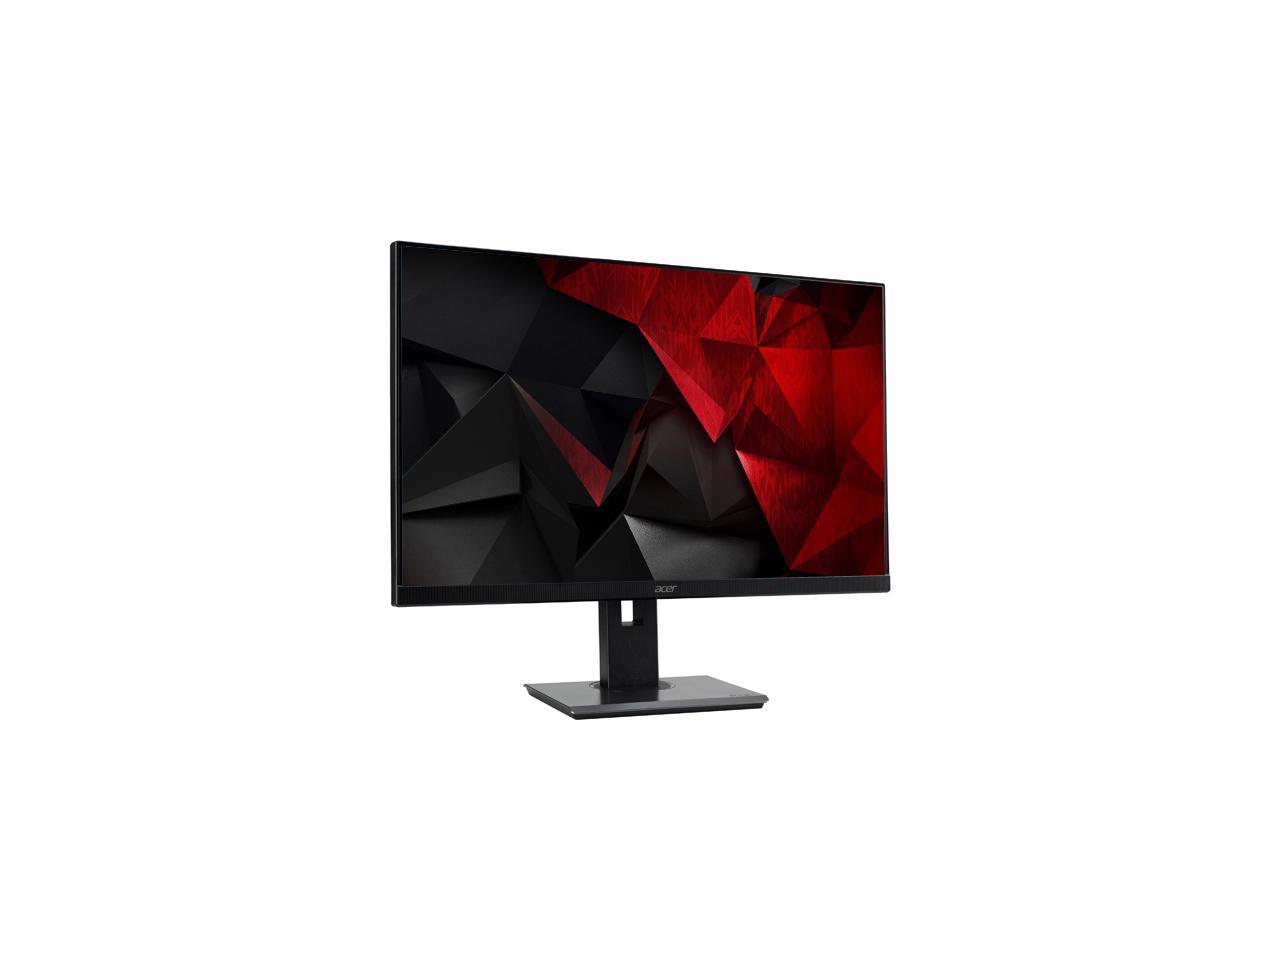 Acer B247Y Cbmipruzx 24" (Actual size 23.8") Full HD 1920 x 1080 4ms GTG 75Hz VGA HDMI DisplayPort AMD FreeSync Built-in Speakers LED Backlight IPS Monitor